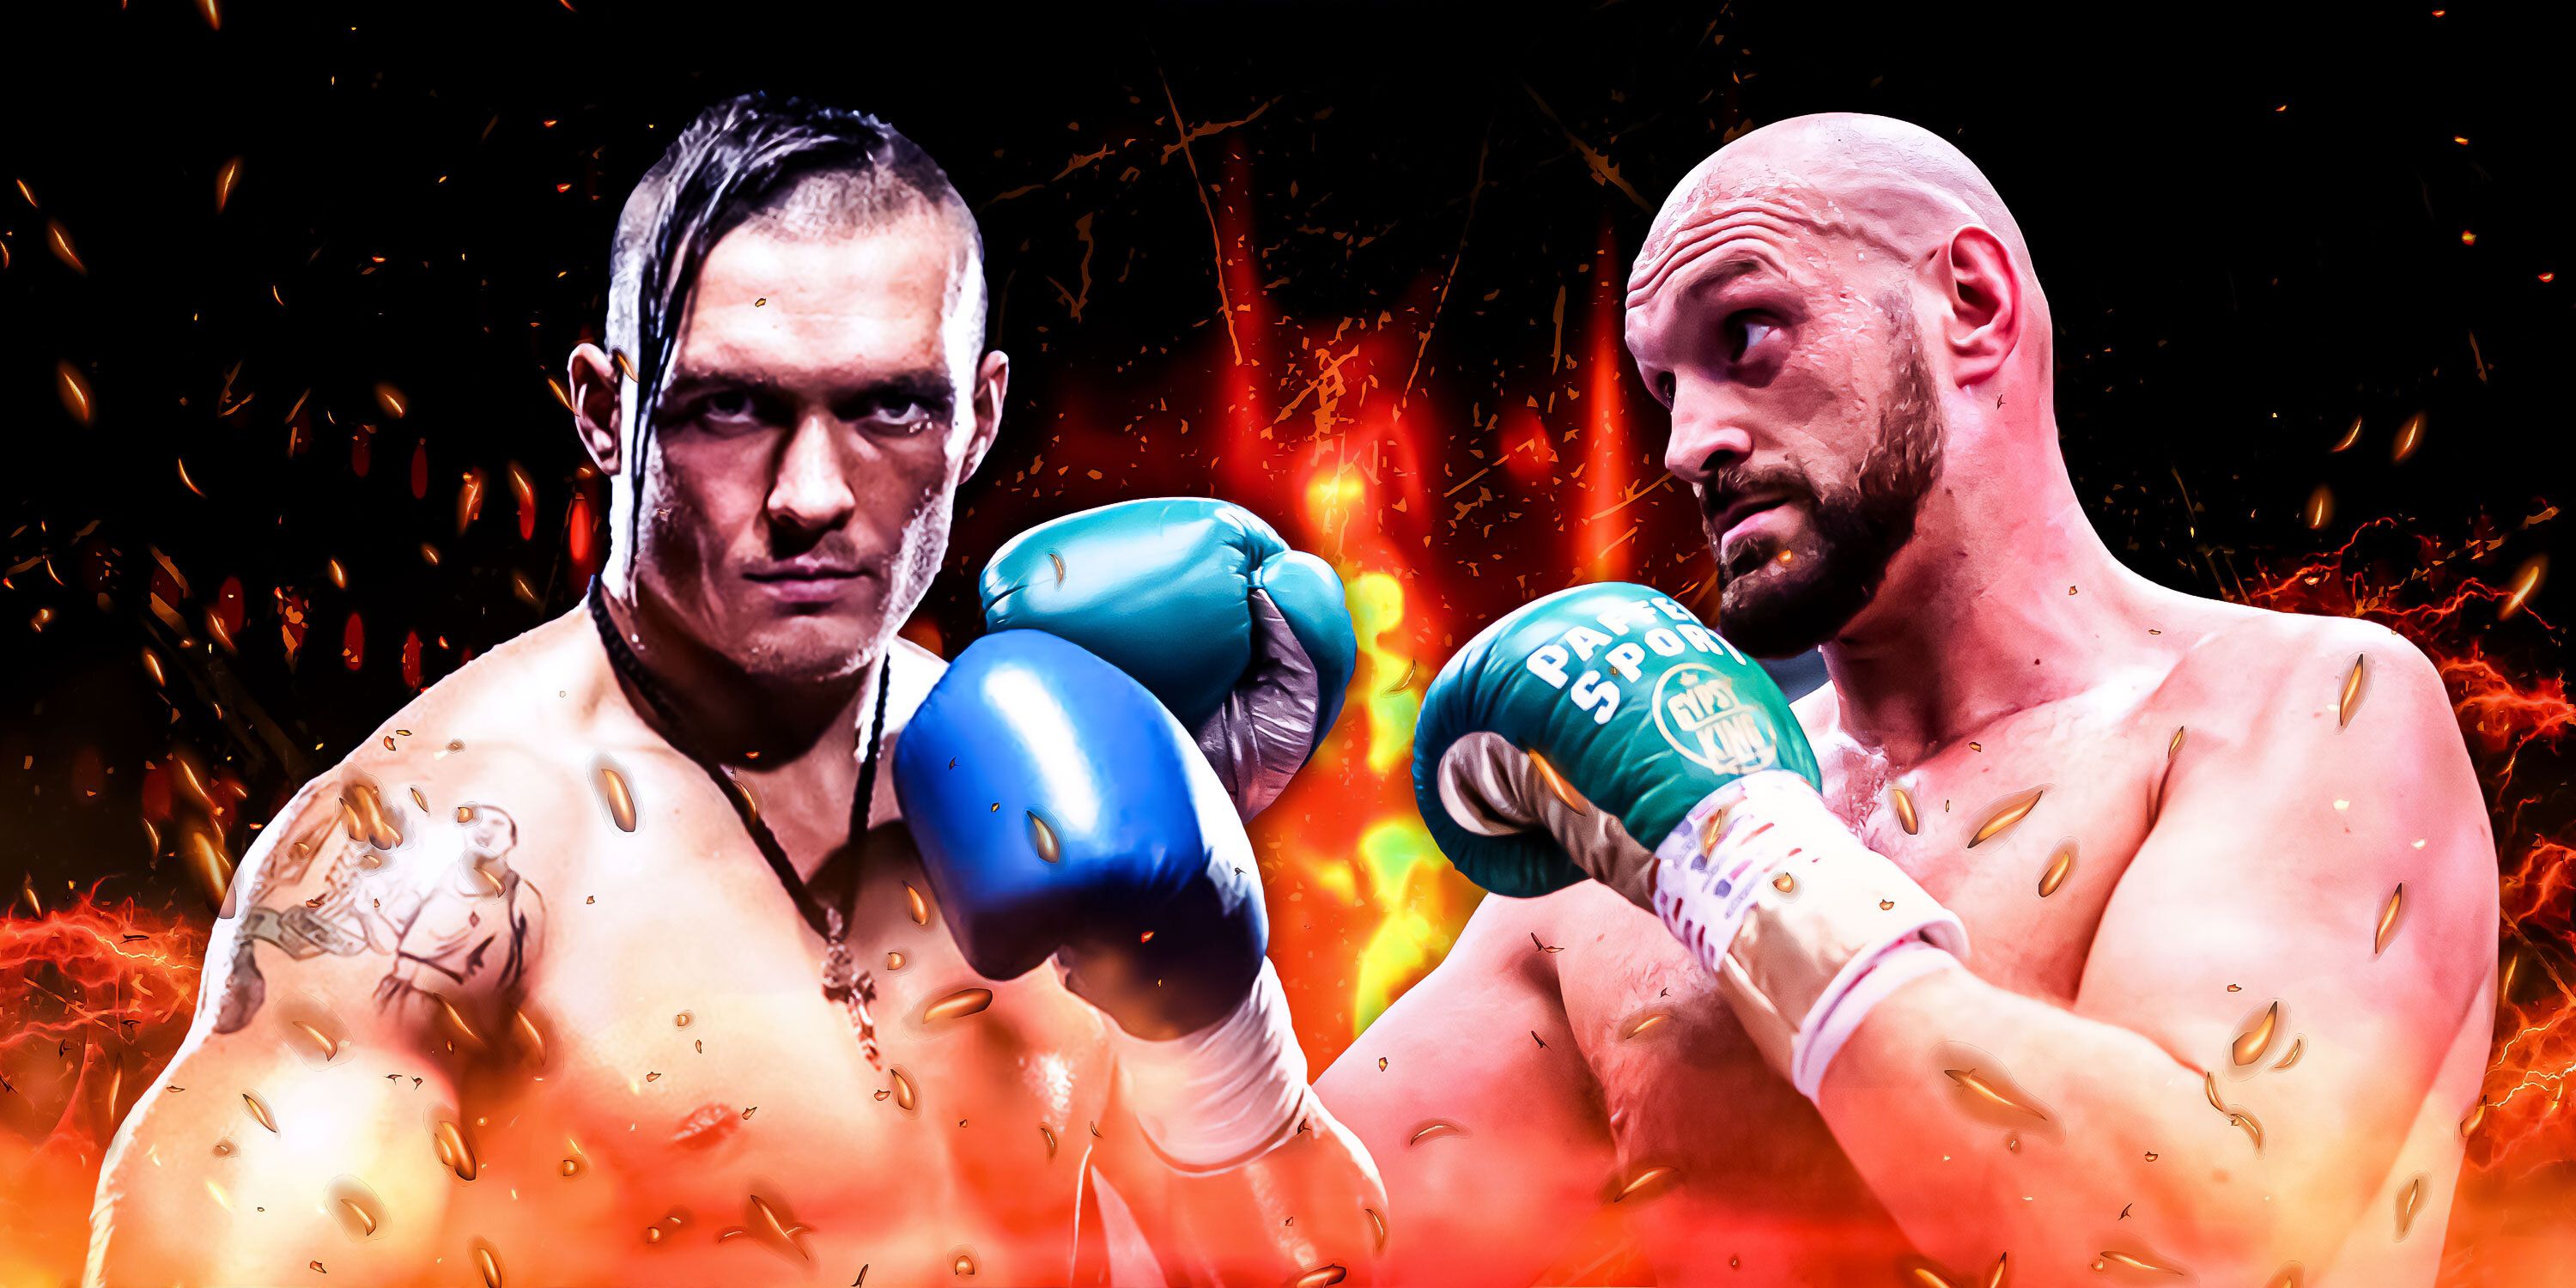 Usyk and Fury